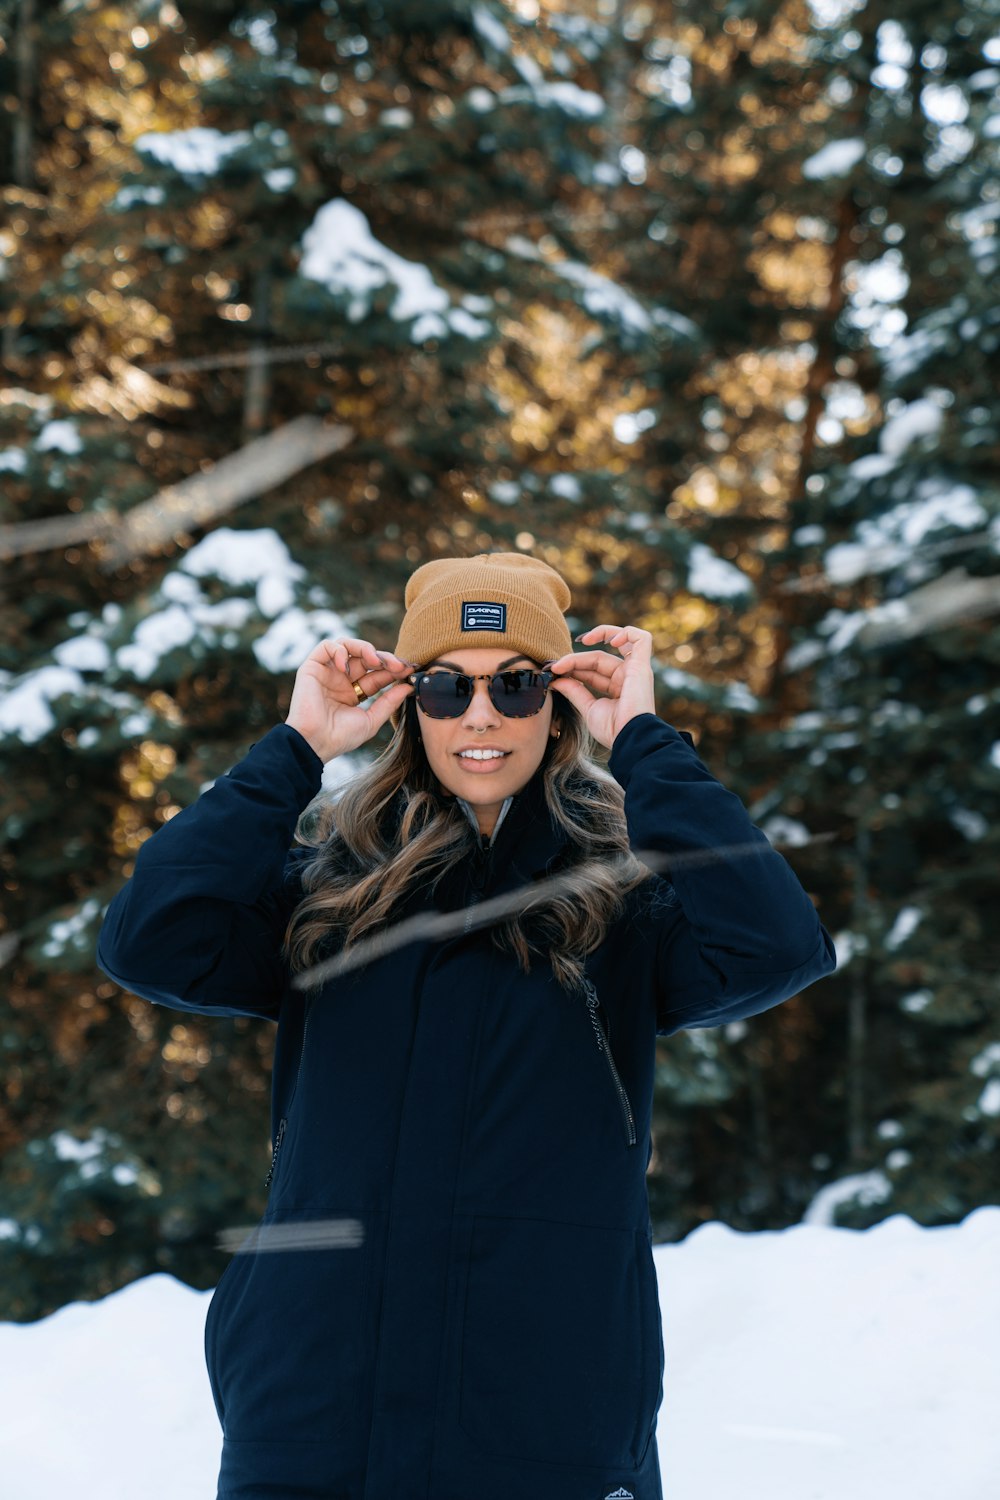 a woman wearing a hat and sunglasses standing in the snow